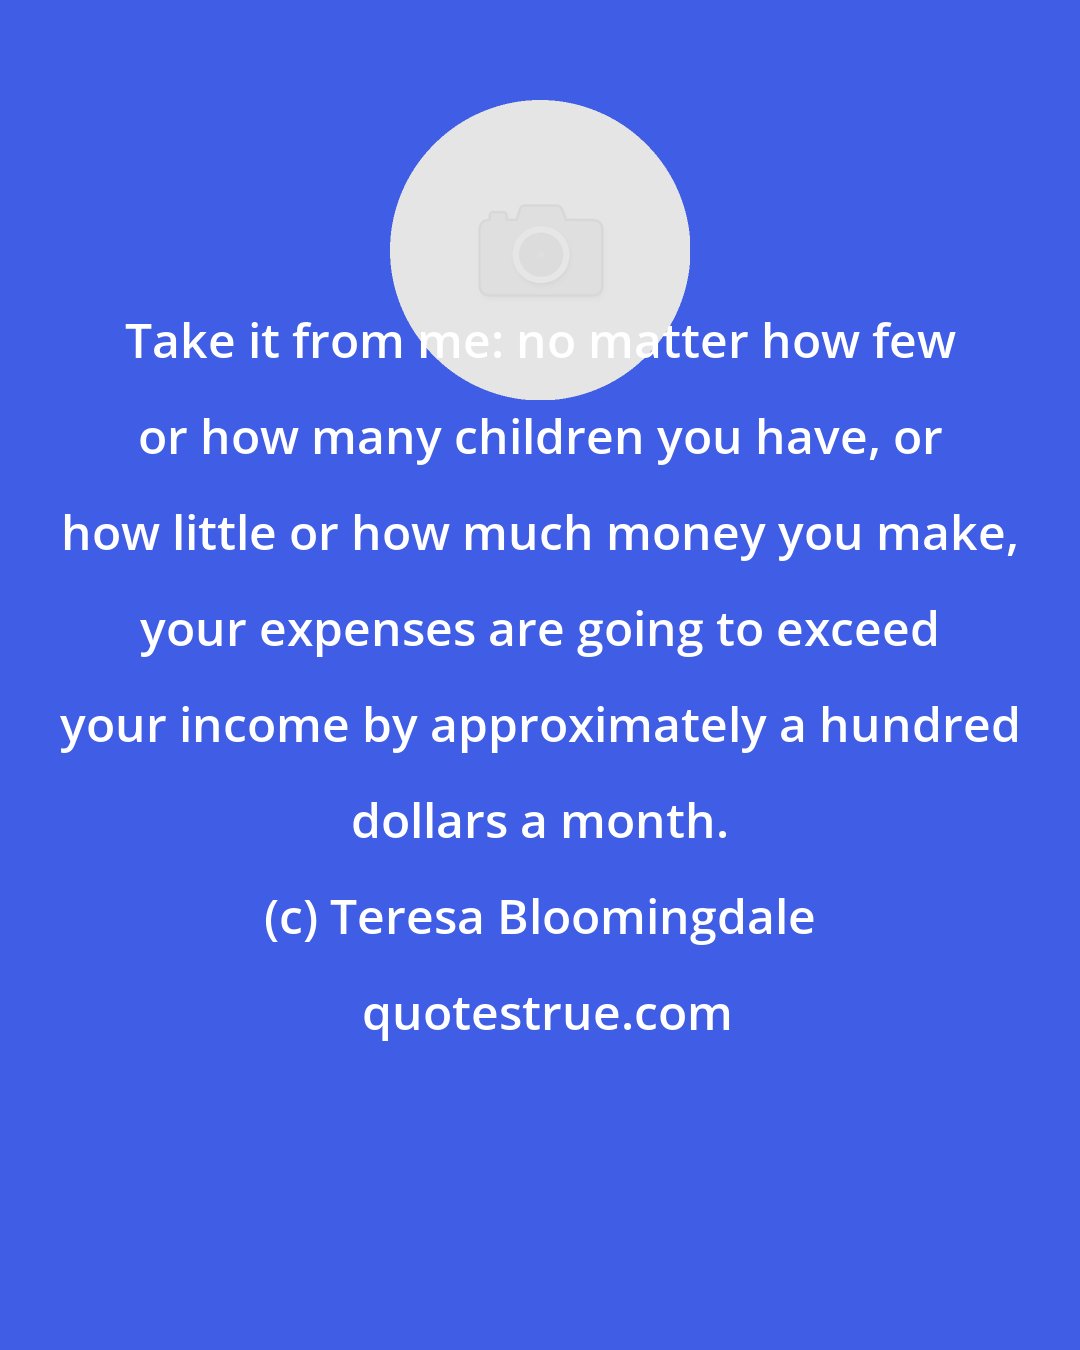 Teresa Bloomingdale: Take it from me: no matter how few or how many children you have, or how little or how much money you make, your expenses are going to exceed your income by approximately a hundred dollars a month.